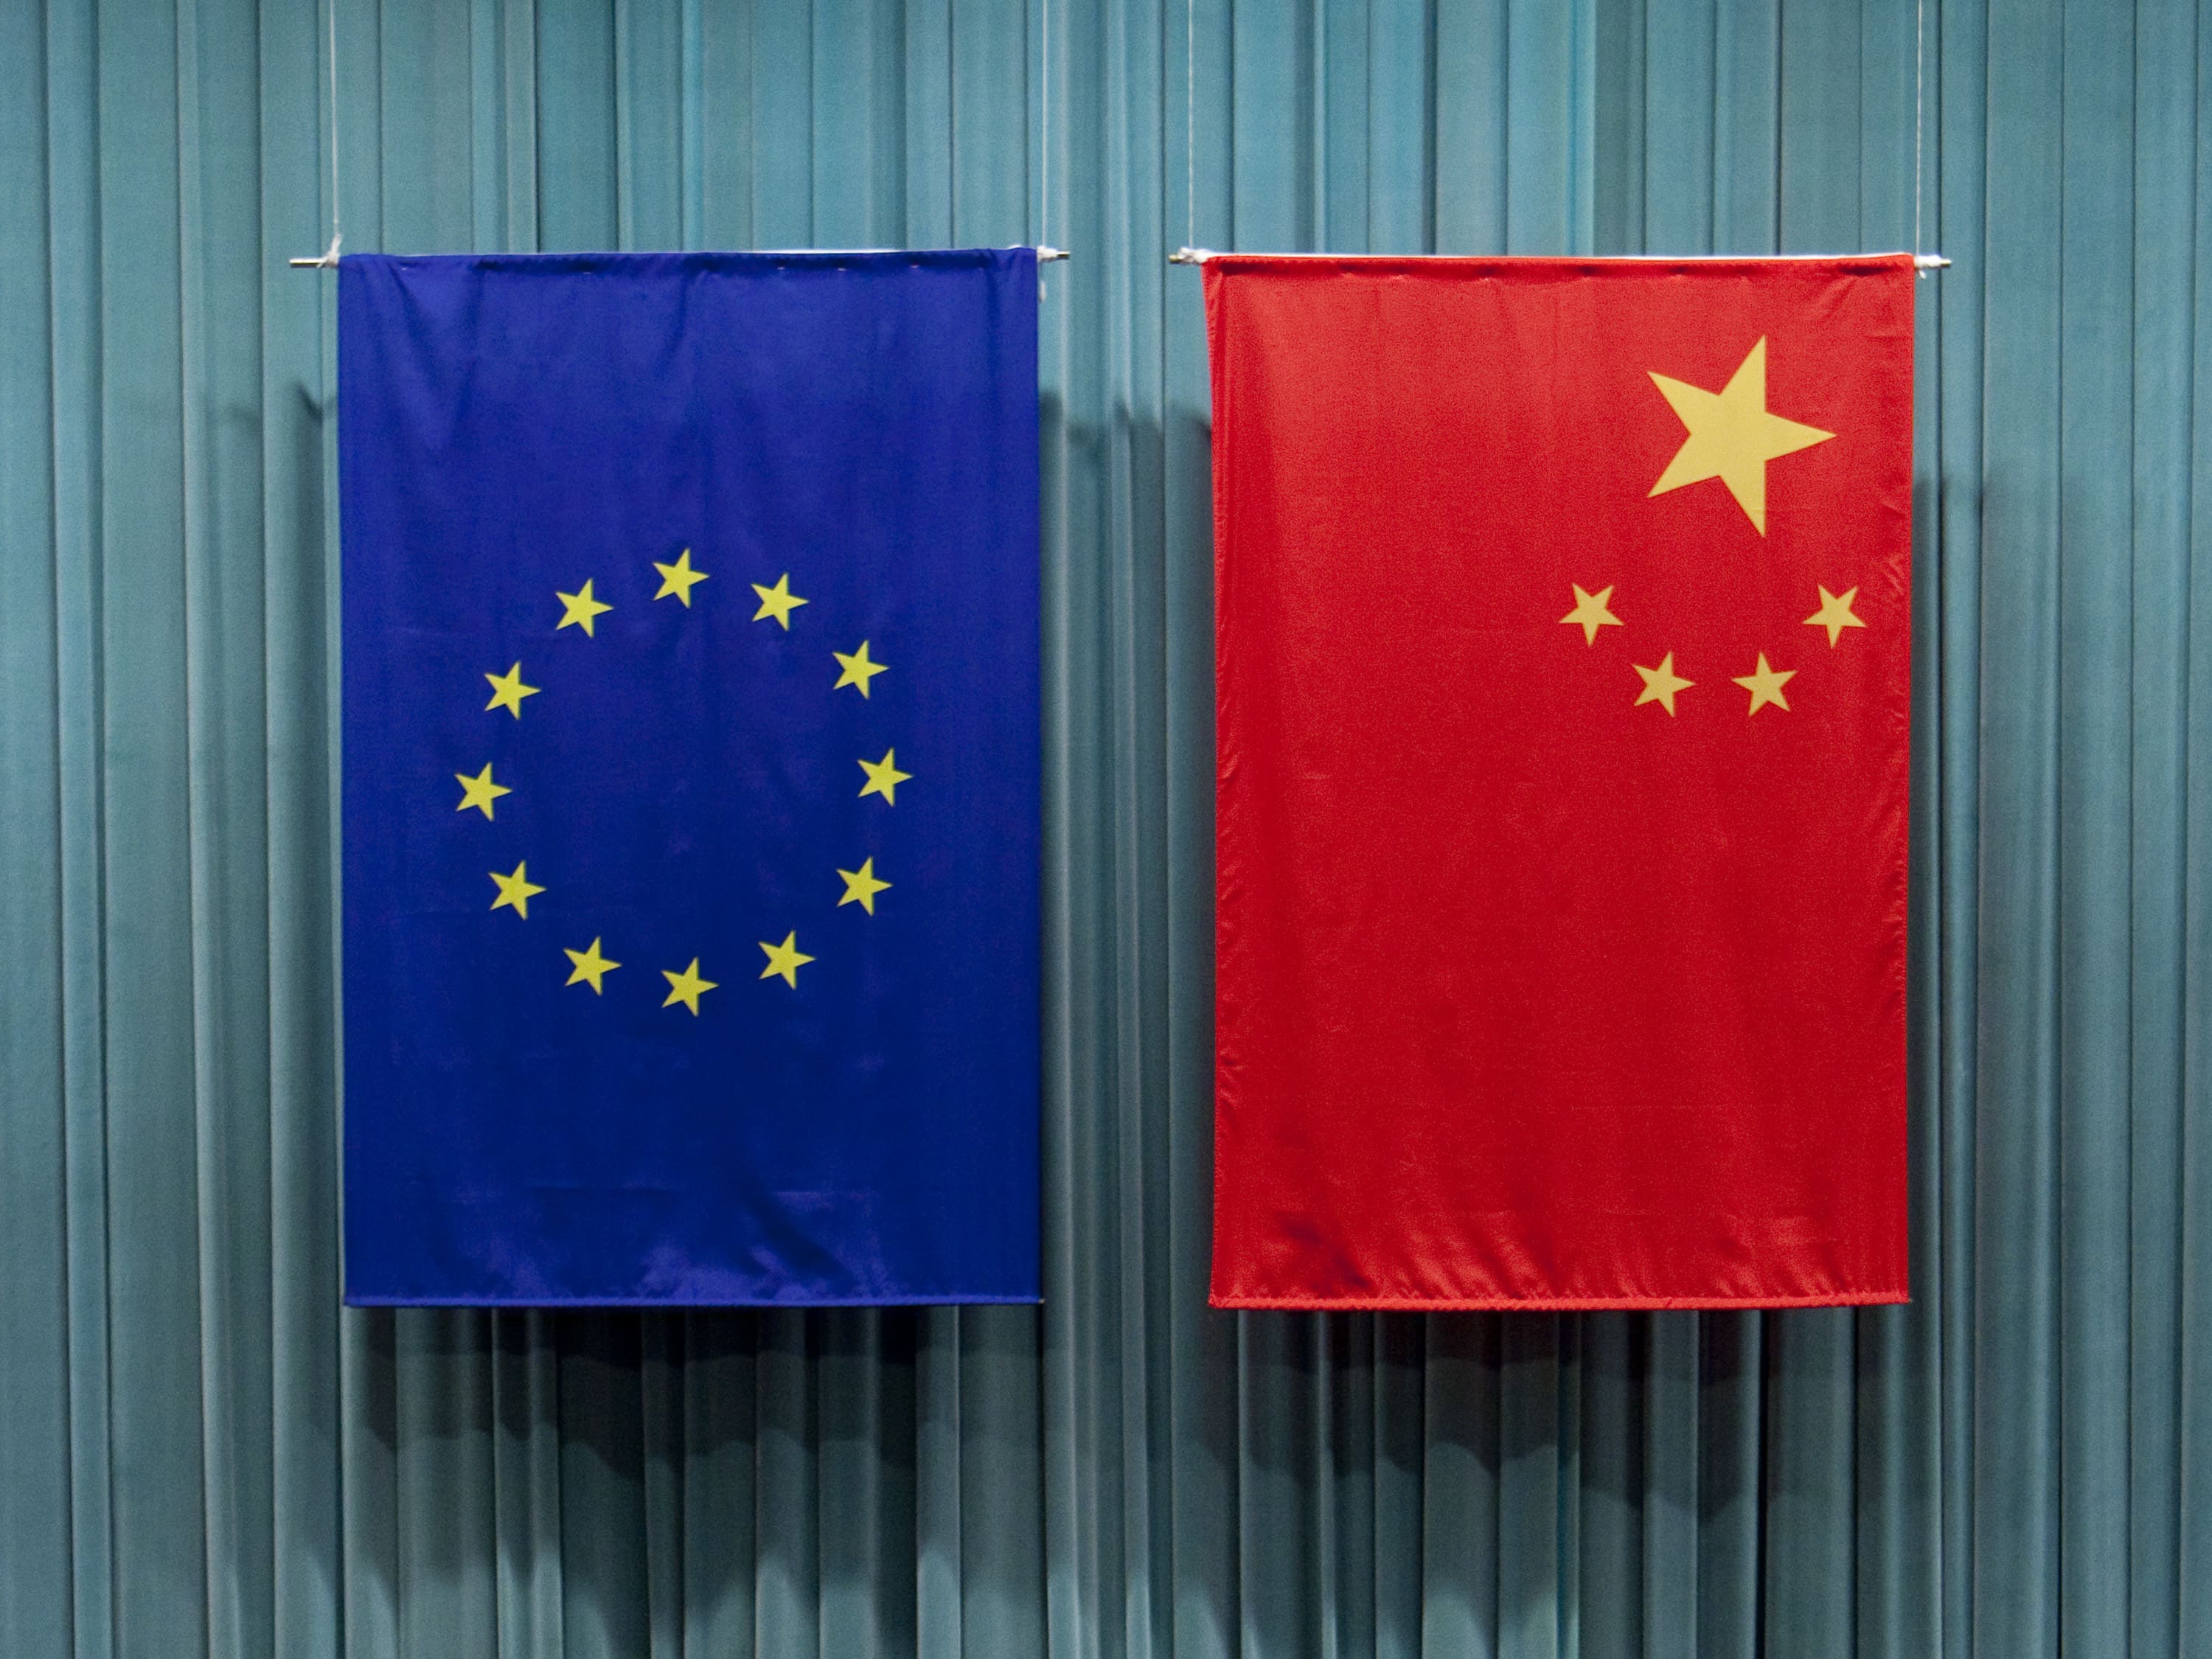 EU-China retaliatory sanctions could jeopardize a new investment agreement